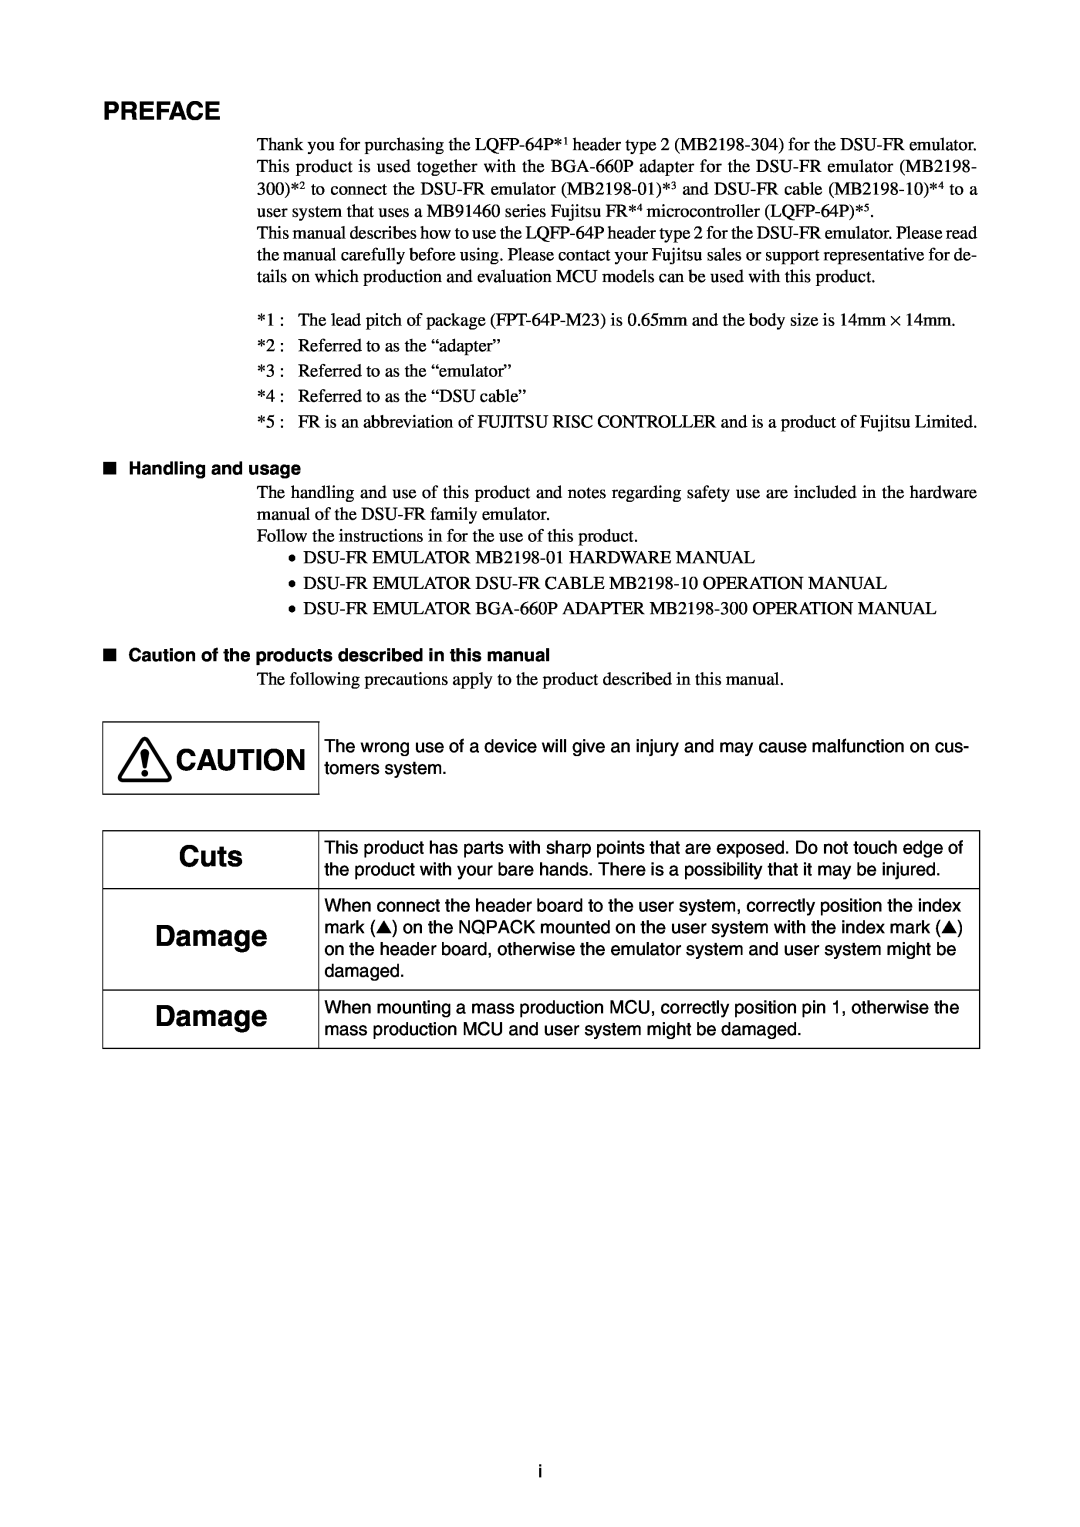 Fujitsu LQFP-64P Preface, Handling and usage, Caution of the products described in this manual, Cuts, Damage 